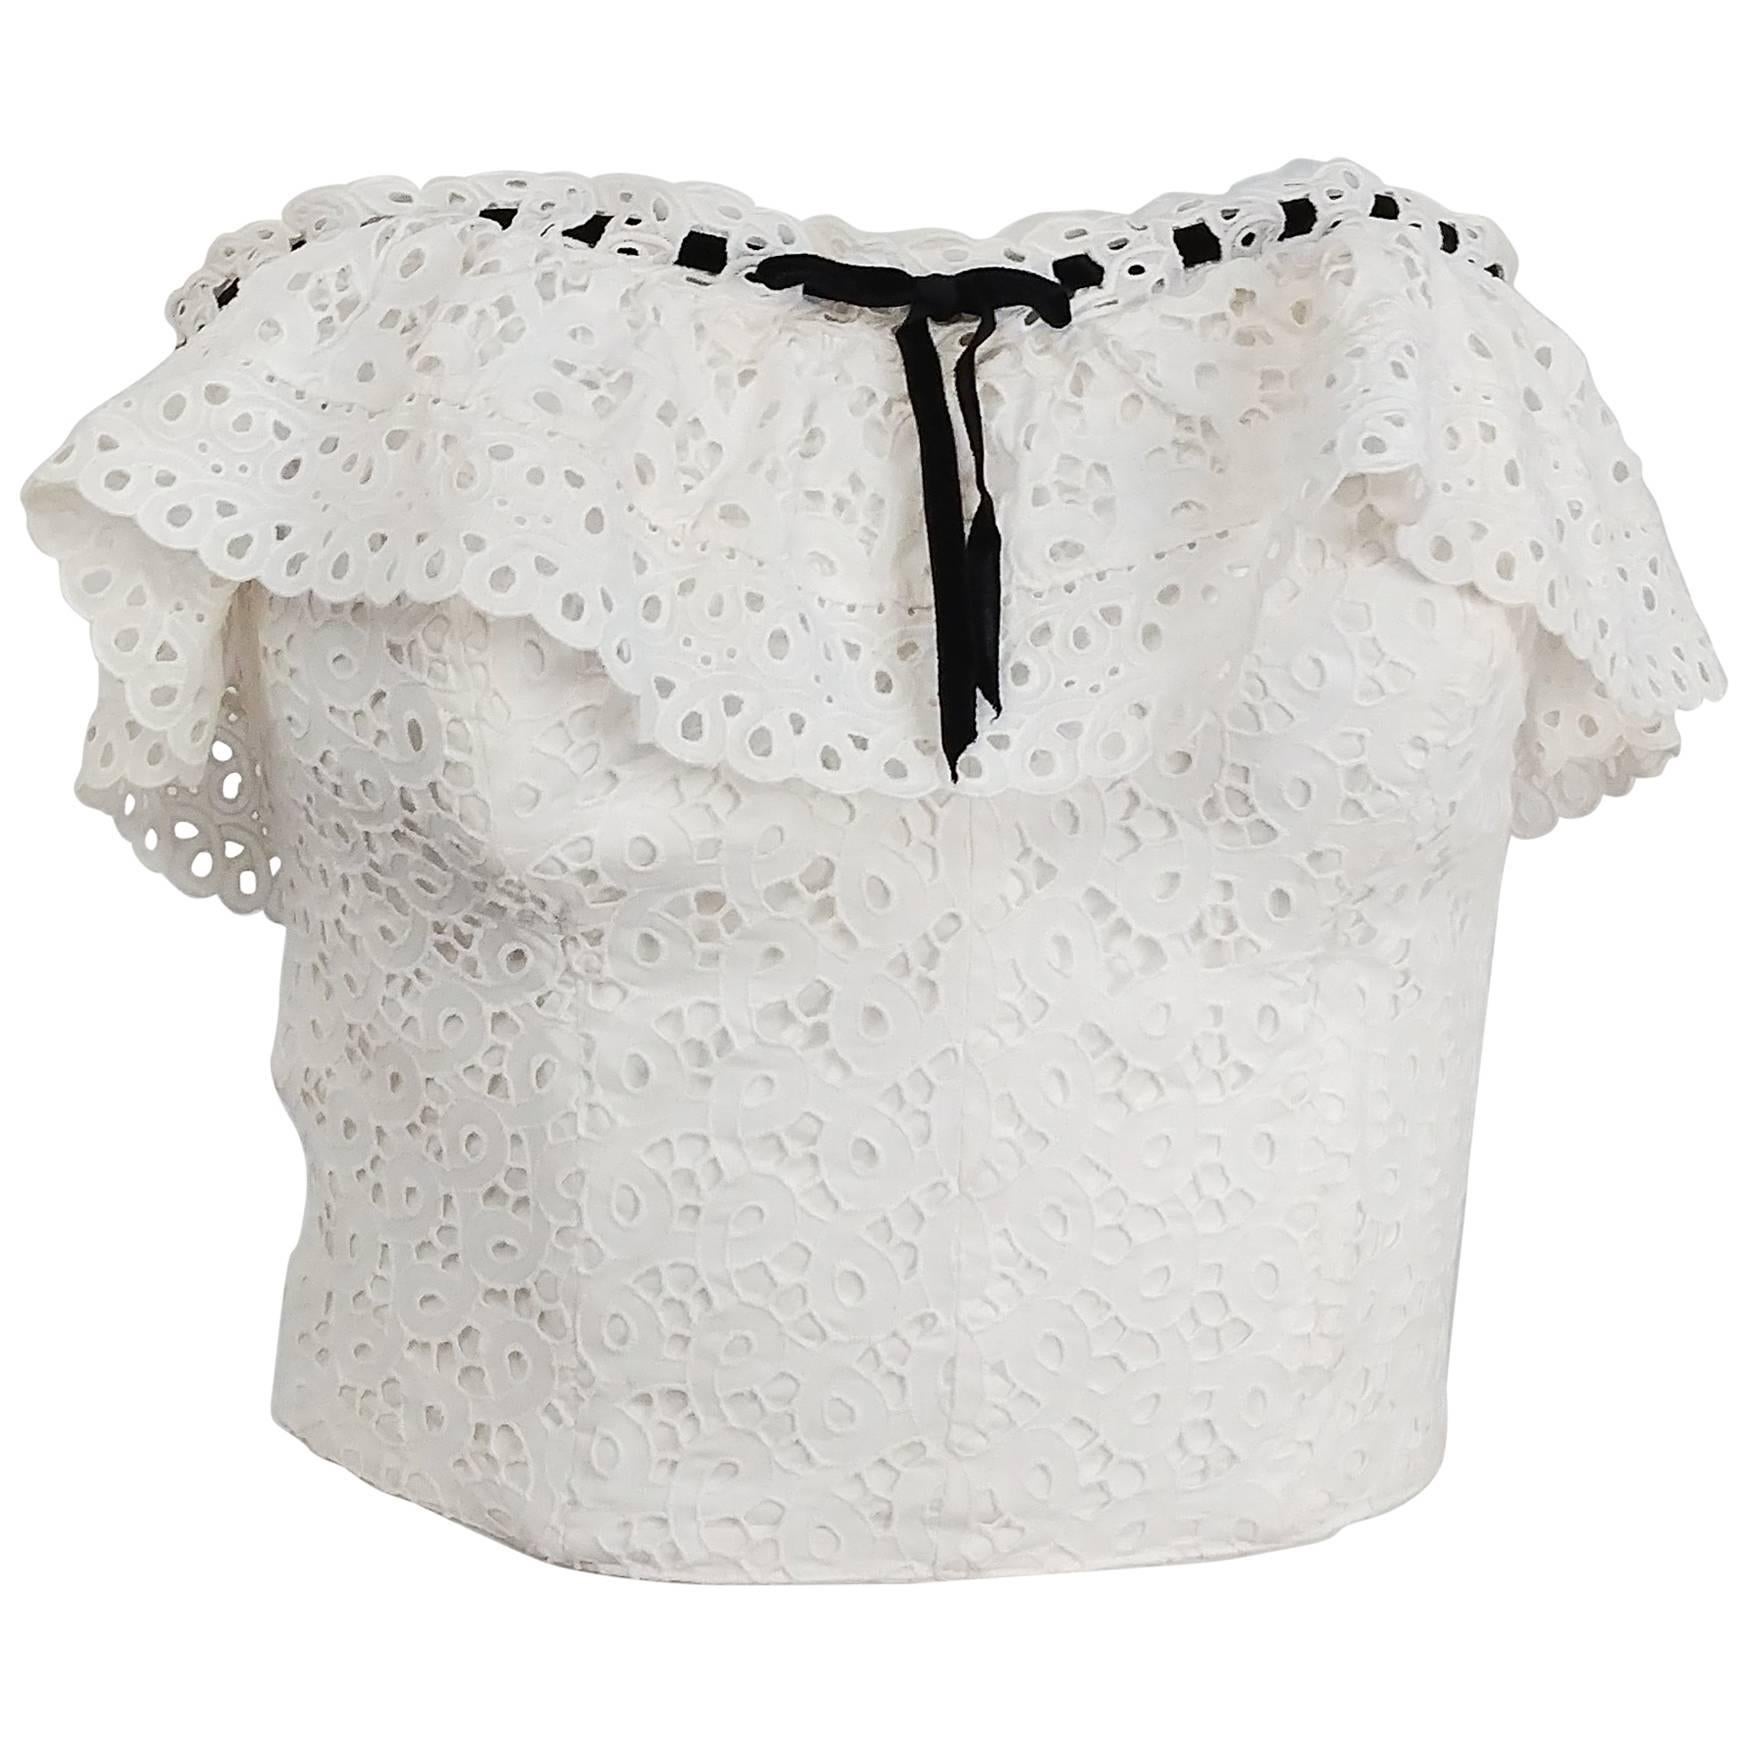 1950s White Cotton Eyelet Lace Bustier Top w/ Ruffle For Sale